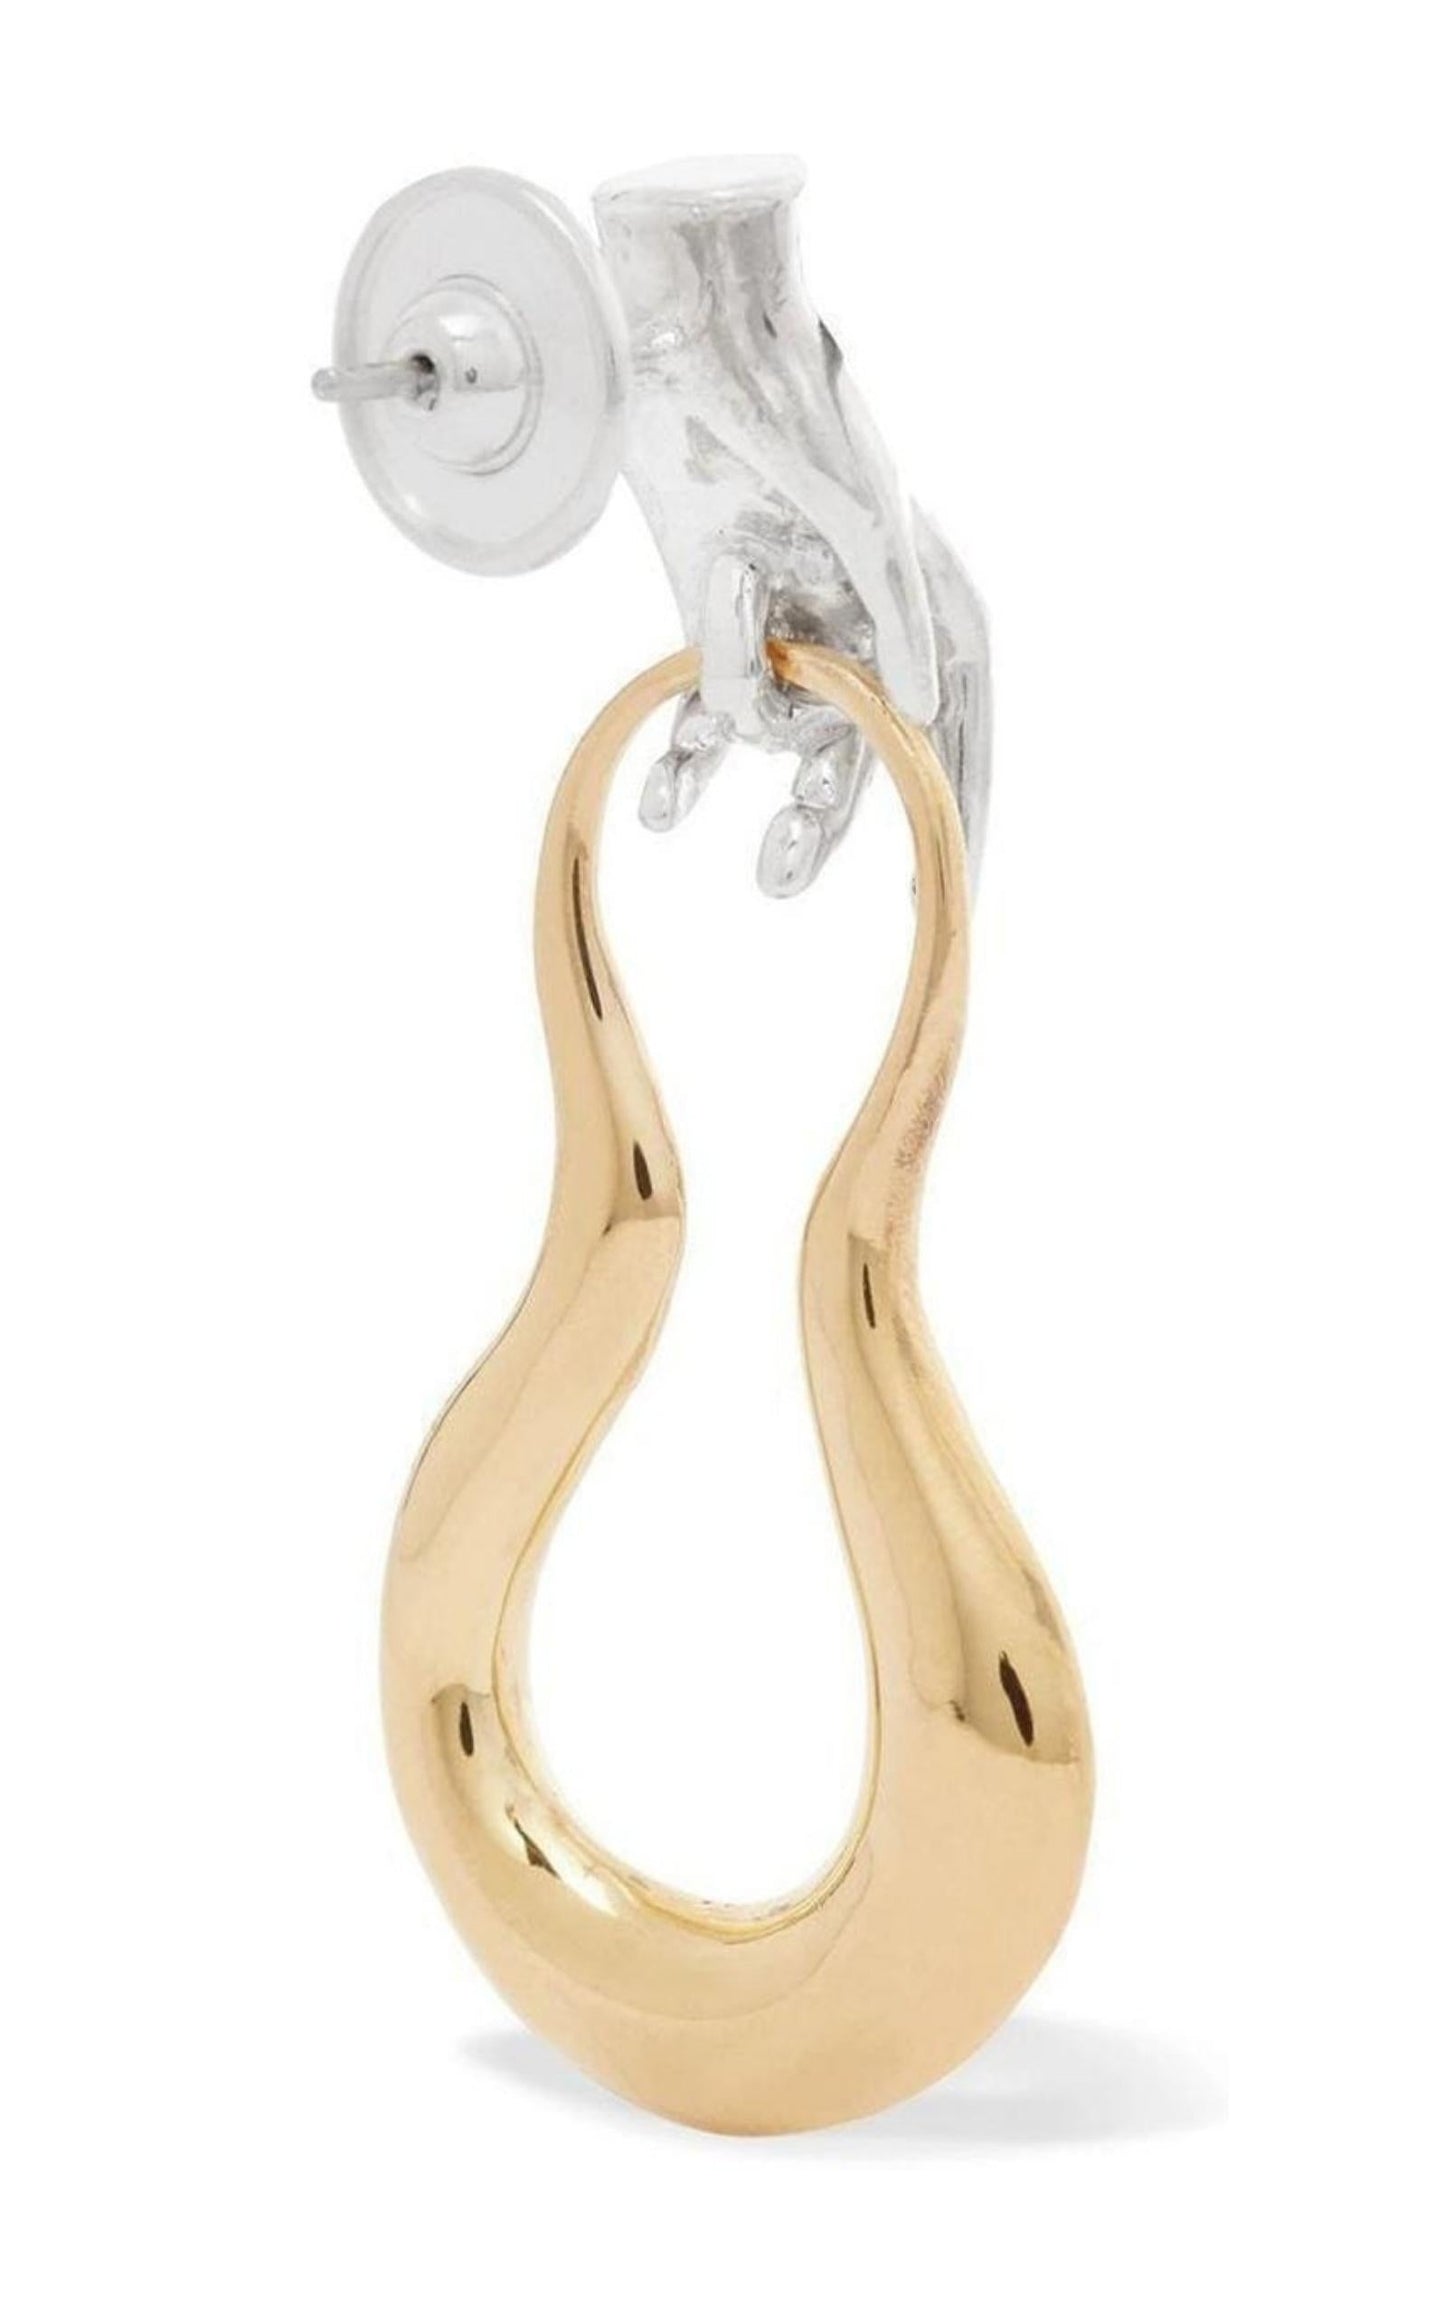  Paola VilasSterling Silver and 18K Gold Plating Earrings - Runway Catalog